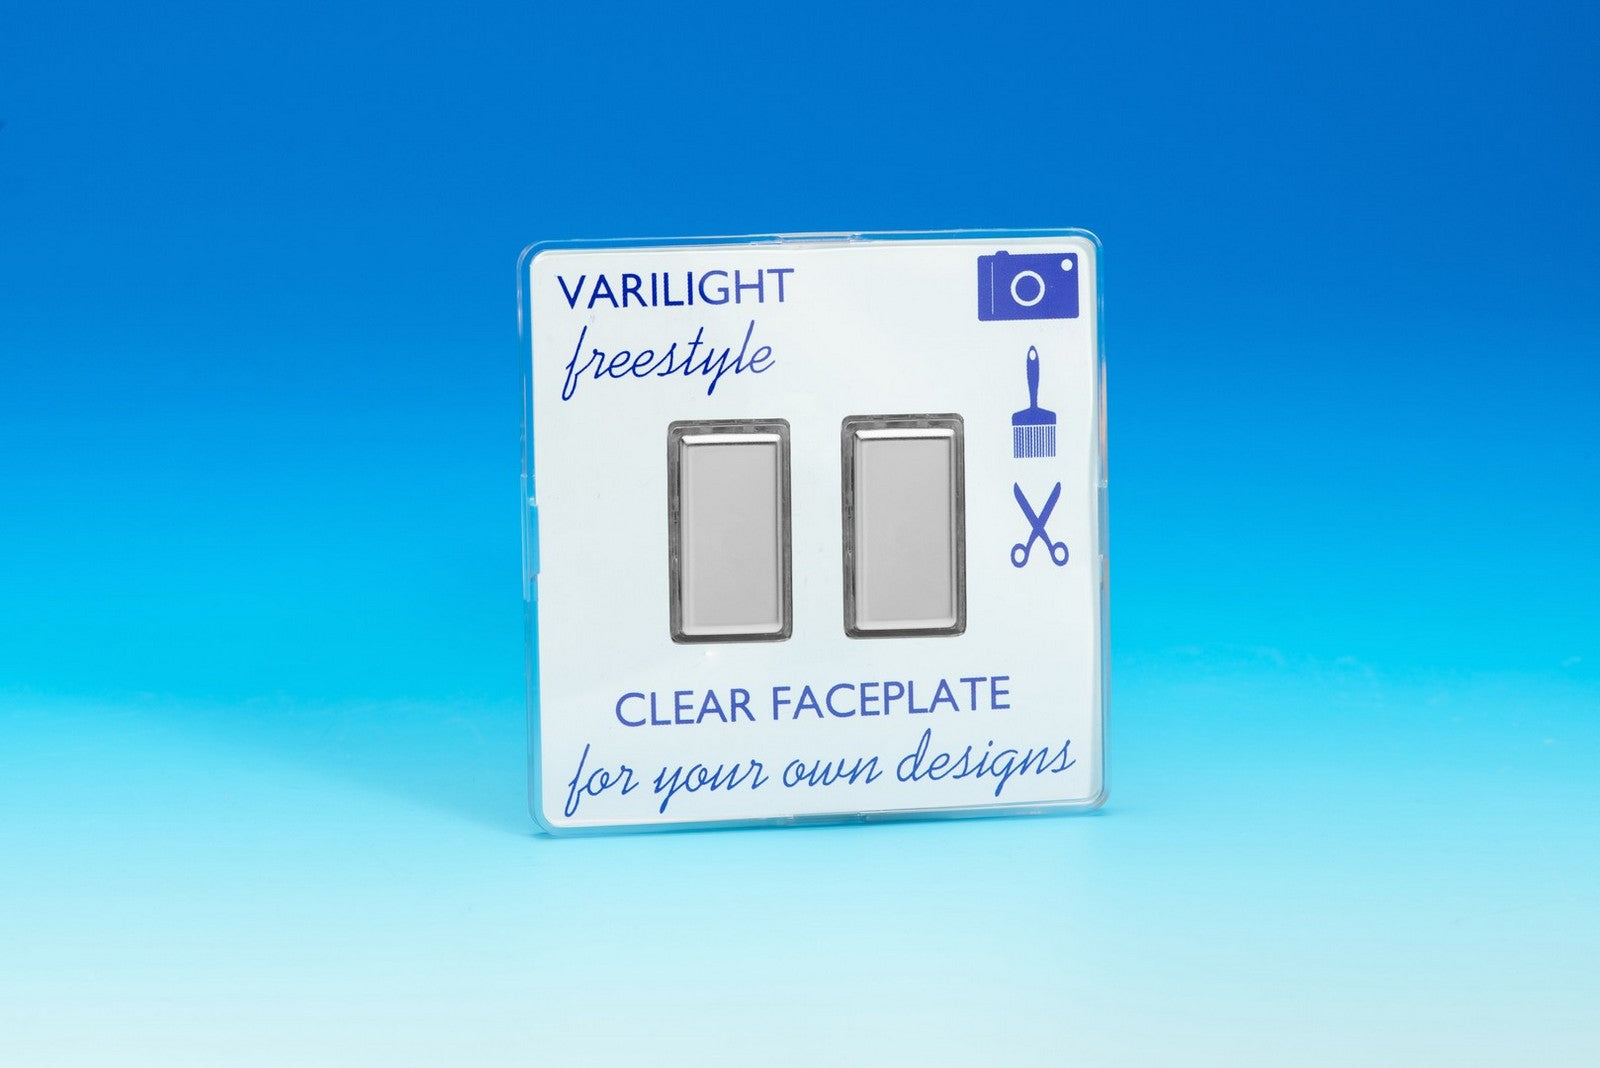 Varilight JIFES002C Freestyle Clear 2-Gang Tactile Touch Control Dimming Slave for use with Multi-Point Touch or Remote Master on 2-Way Circuits